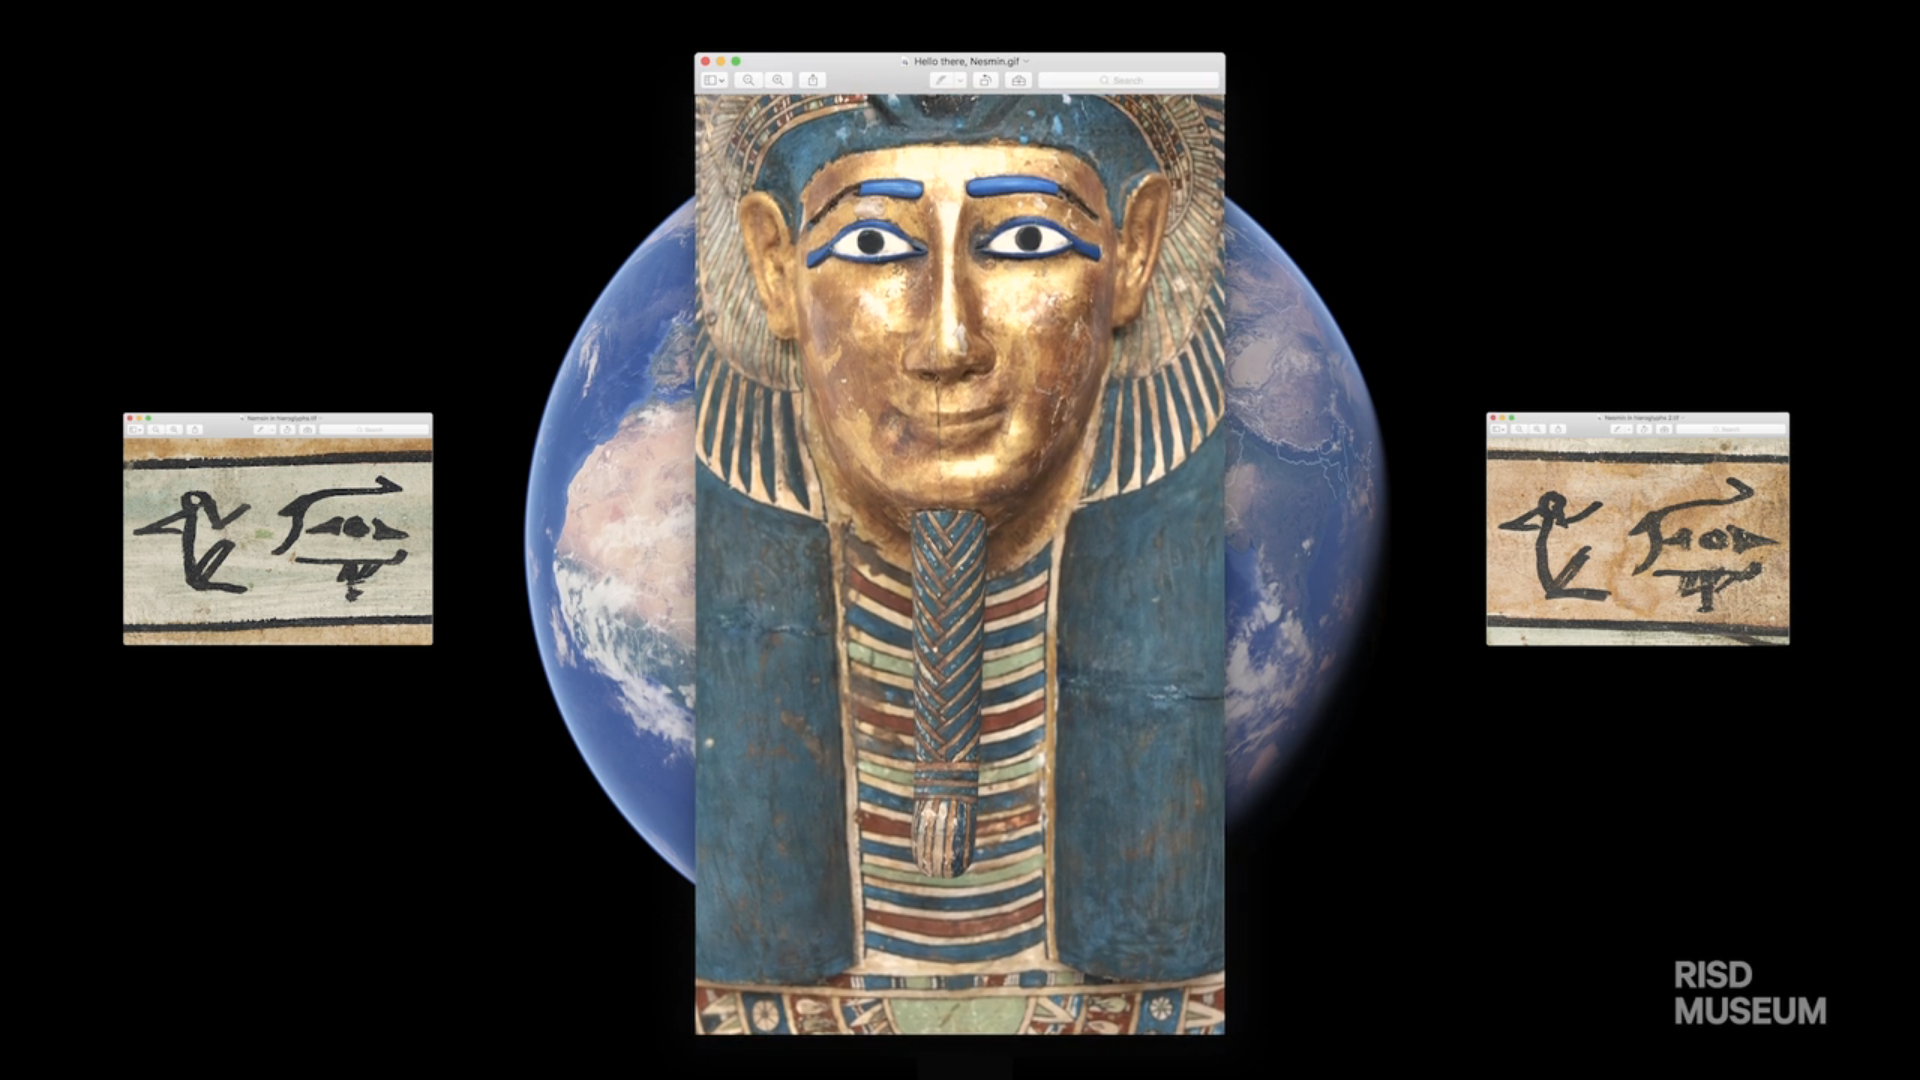 Digital collage. Close-up photo of Nesmin's gilded coffin face sits on top of a screencapture of Google Earth showing the globe at night. Boxes with hieroglyphs flank the globe on either side.